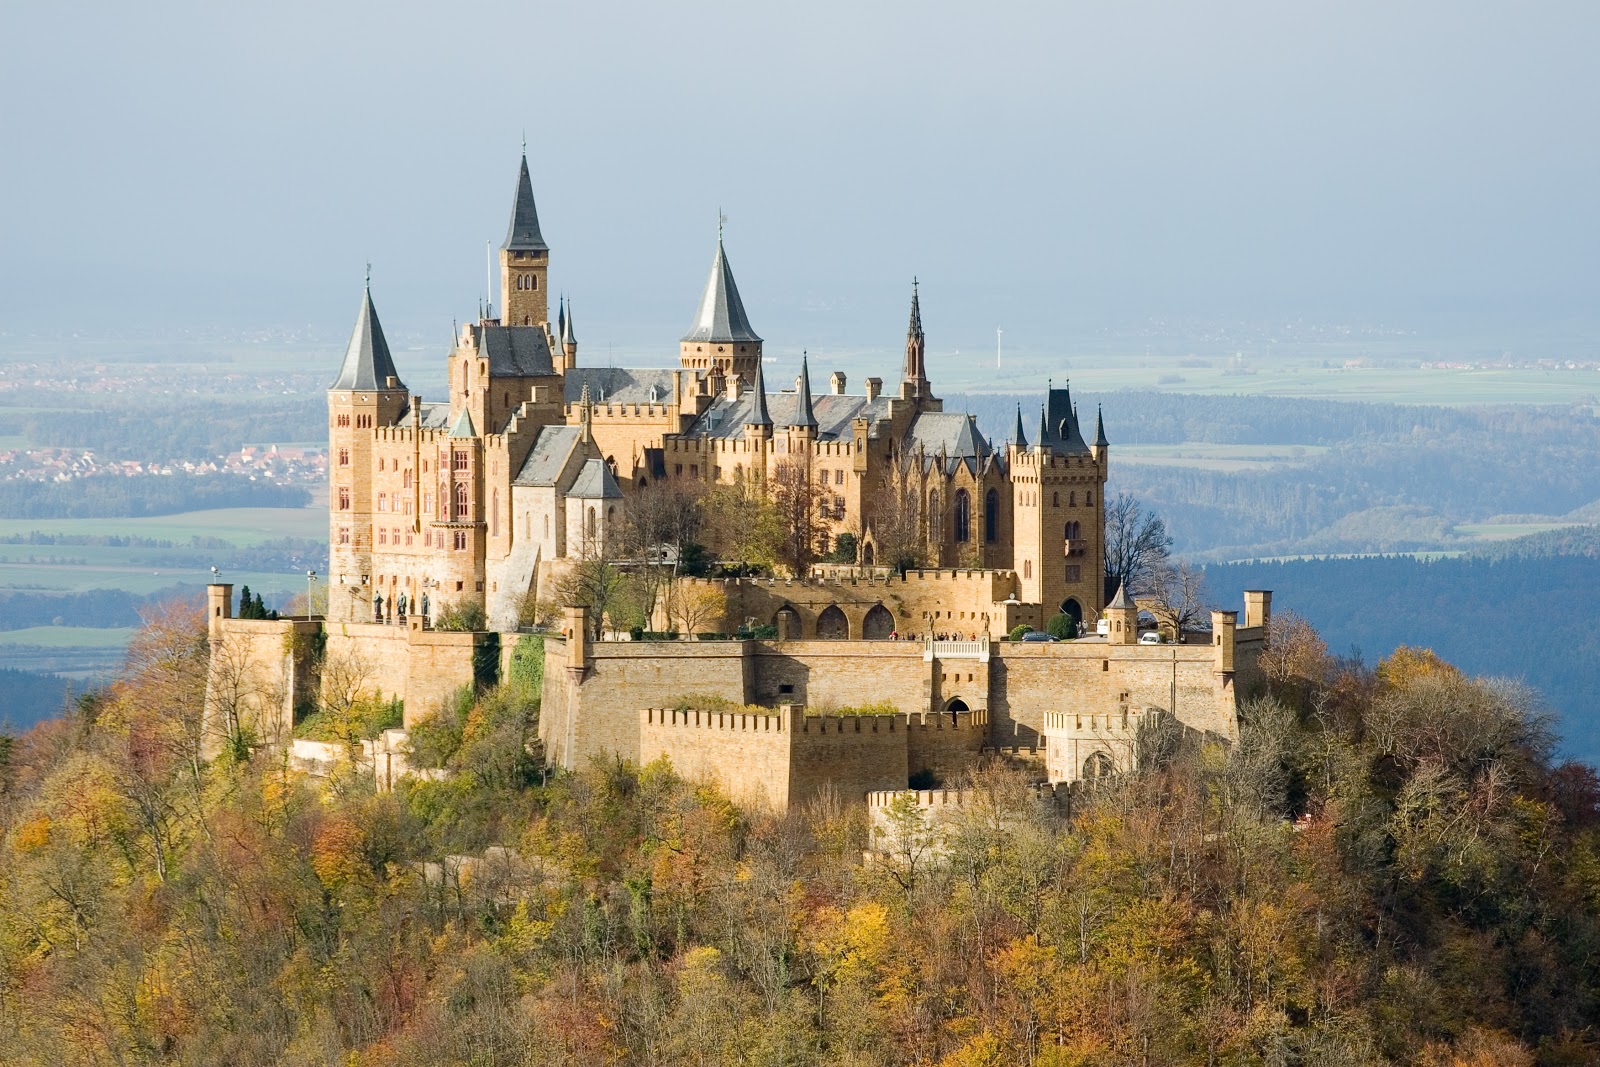 Castles and Forts around the world: Fairy tale castles